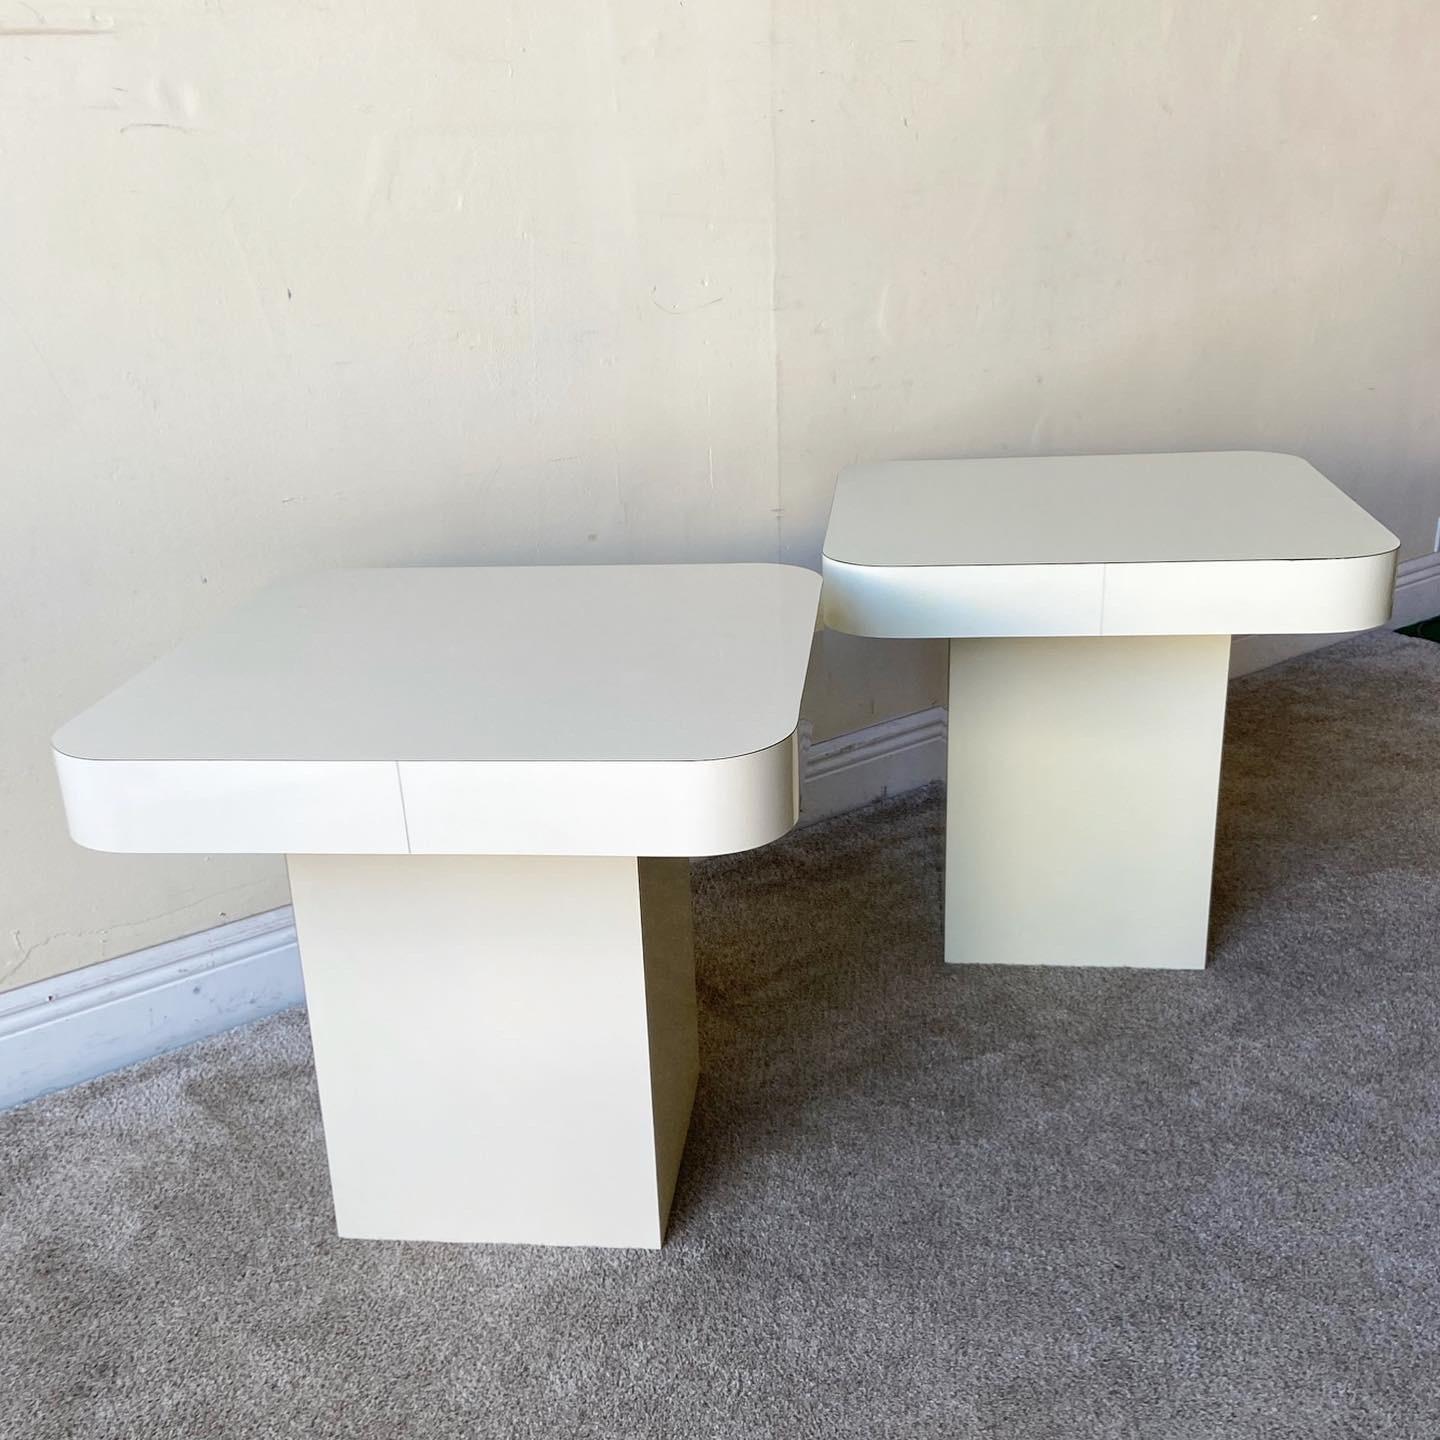 Amazing pair of square top mushroom side table. Each features rounded edges. One of the tables is a very light beige and the other is a cream.